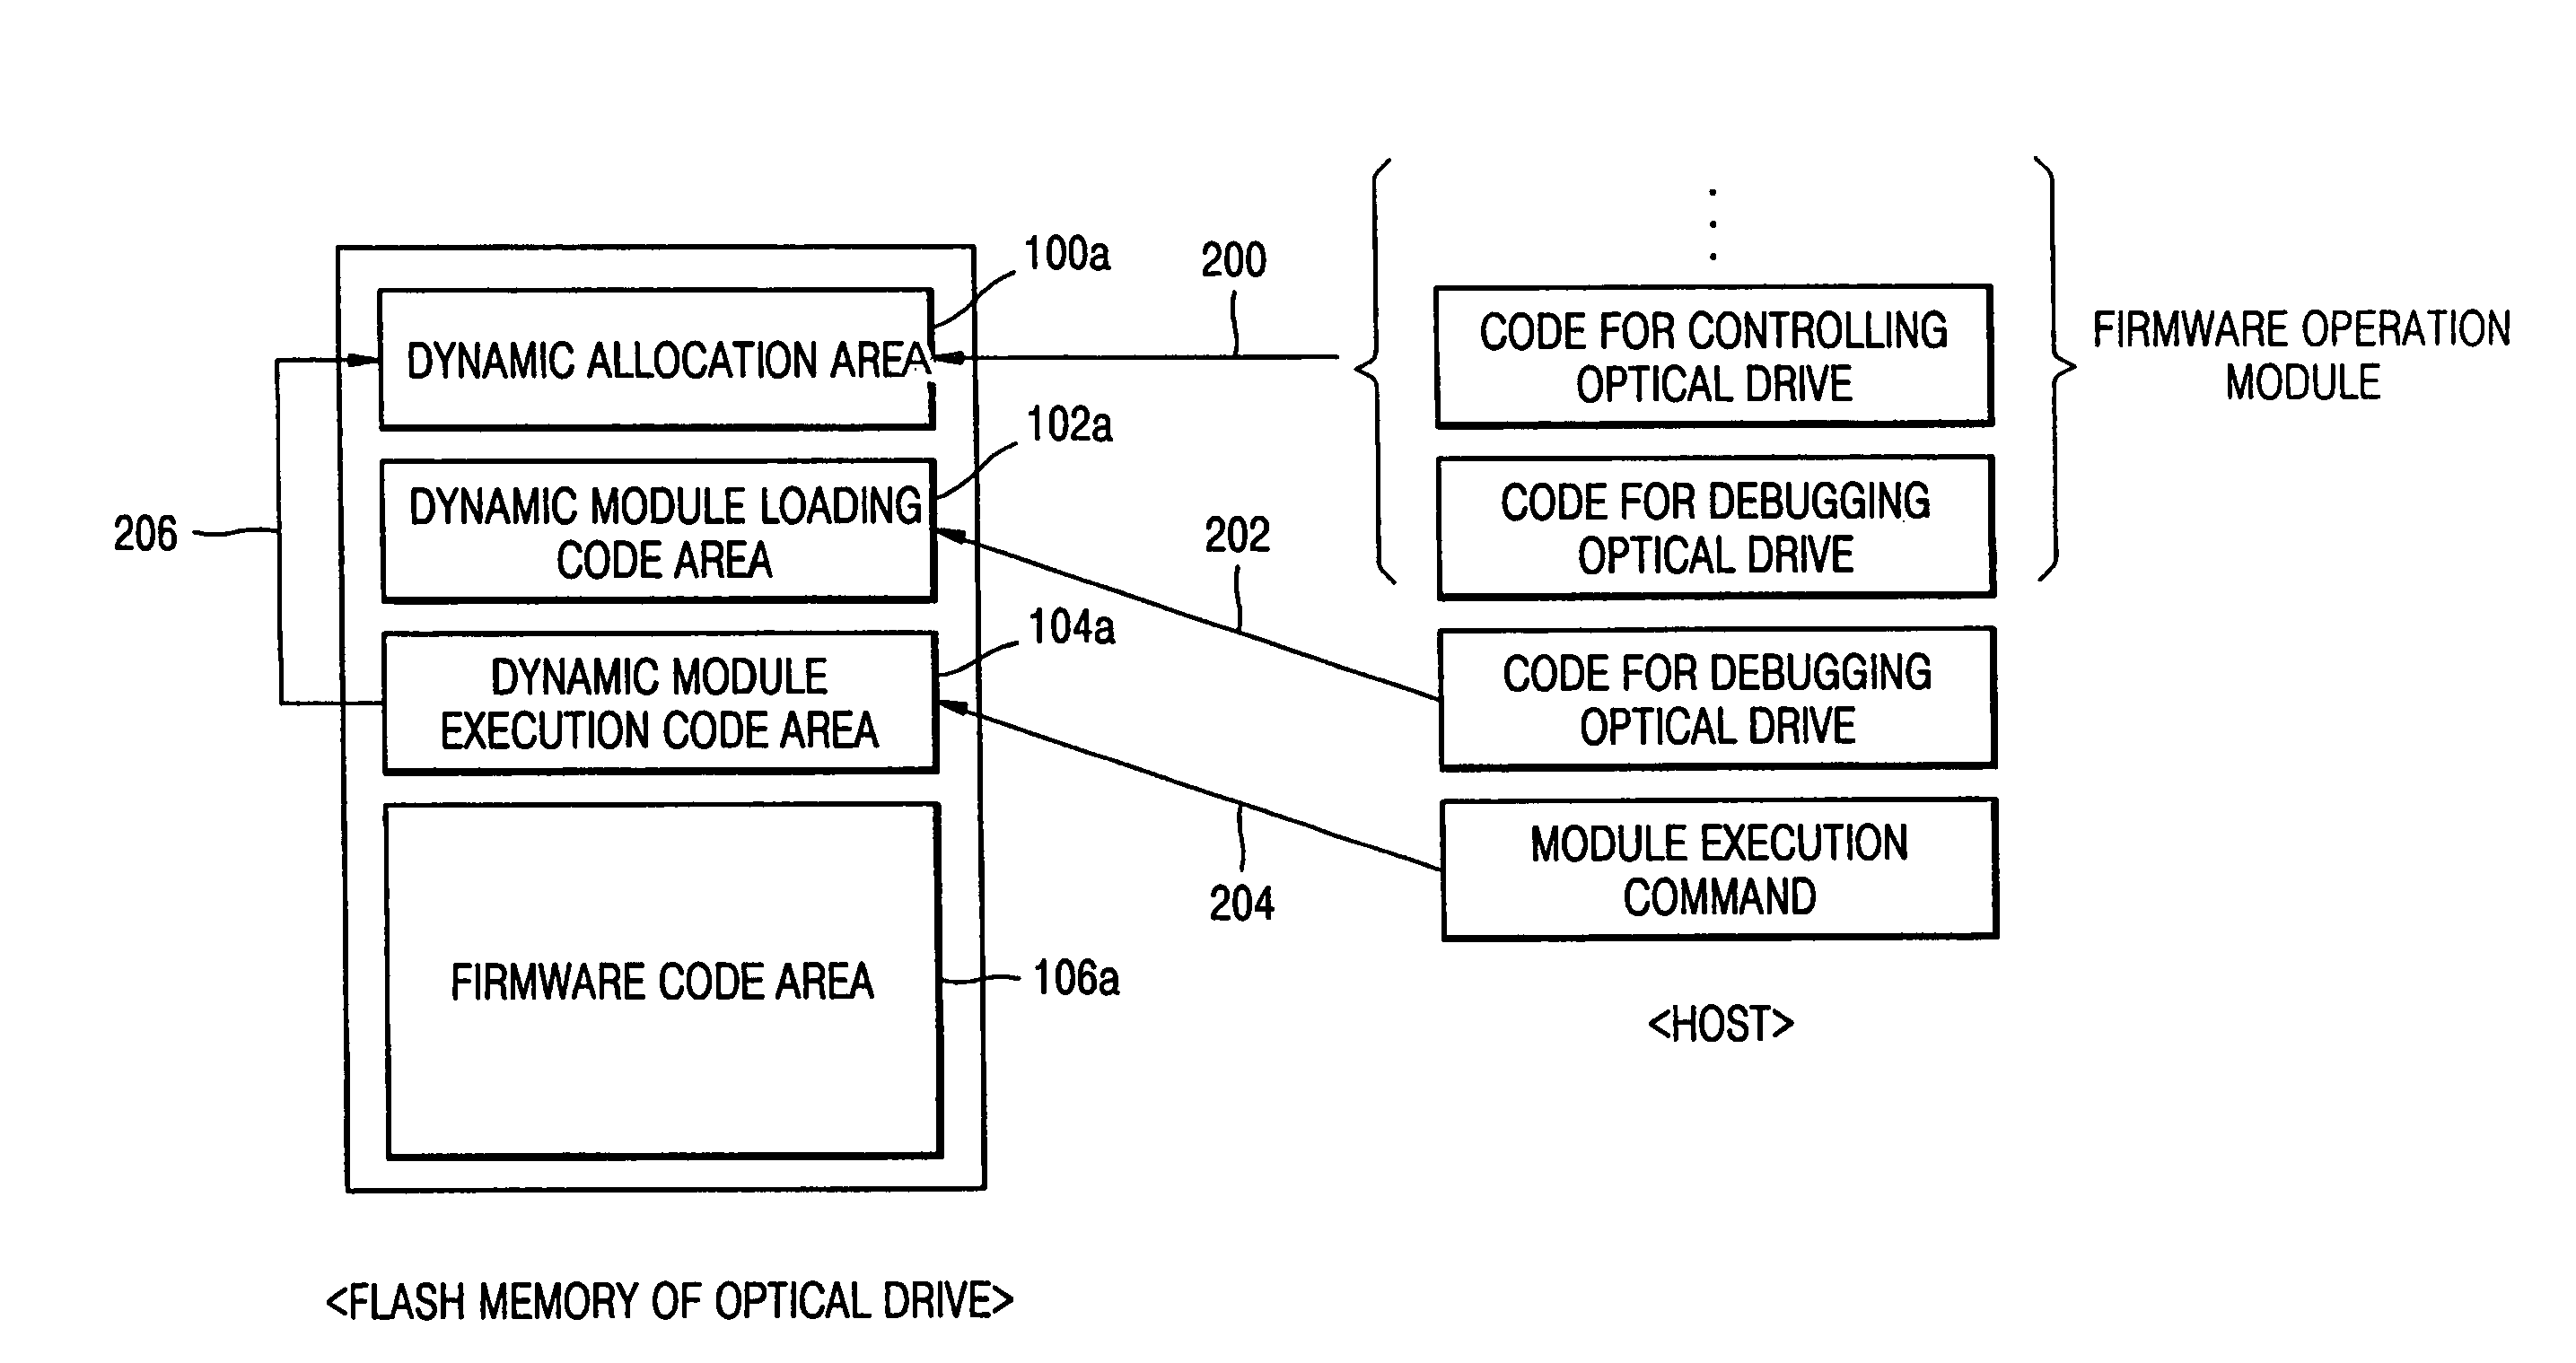 Flash memory and method of dynamically loading firmware operation module in optical drive